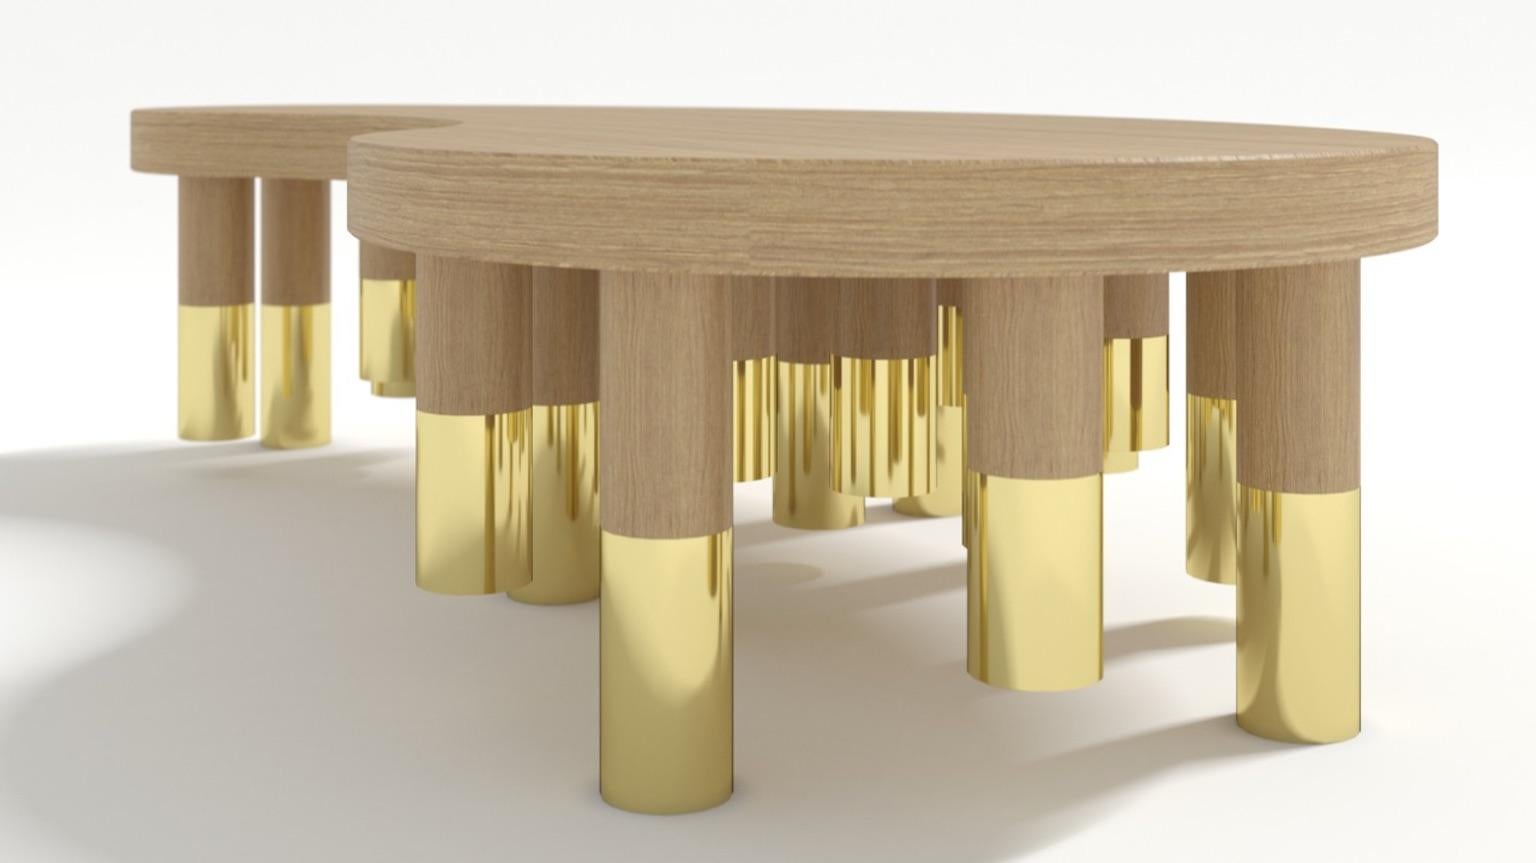 Stalattite model coffee table, bean-shaped top in cedar from Lebanon and 25 legs made up of unequal height stems in polished brass and cedar wood, designed by Studio Superego for Superego Editions.

Biography:
Superego editions was born in 2006,